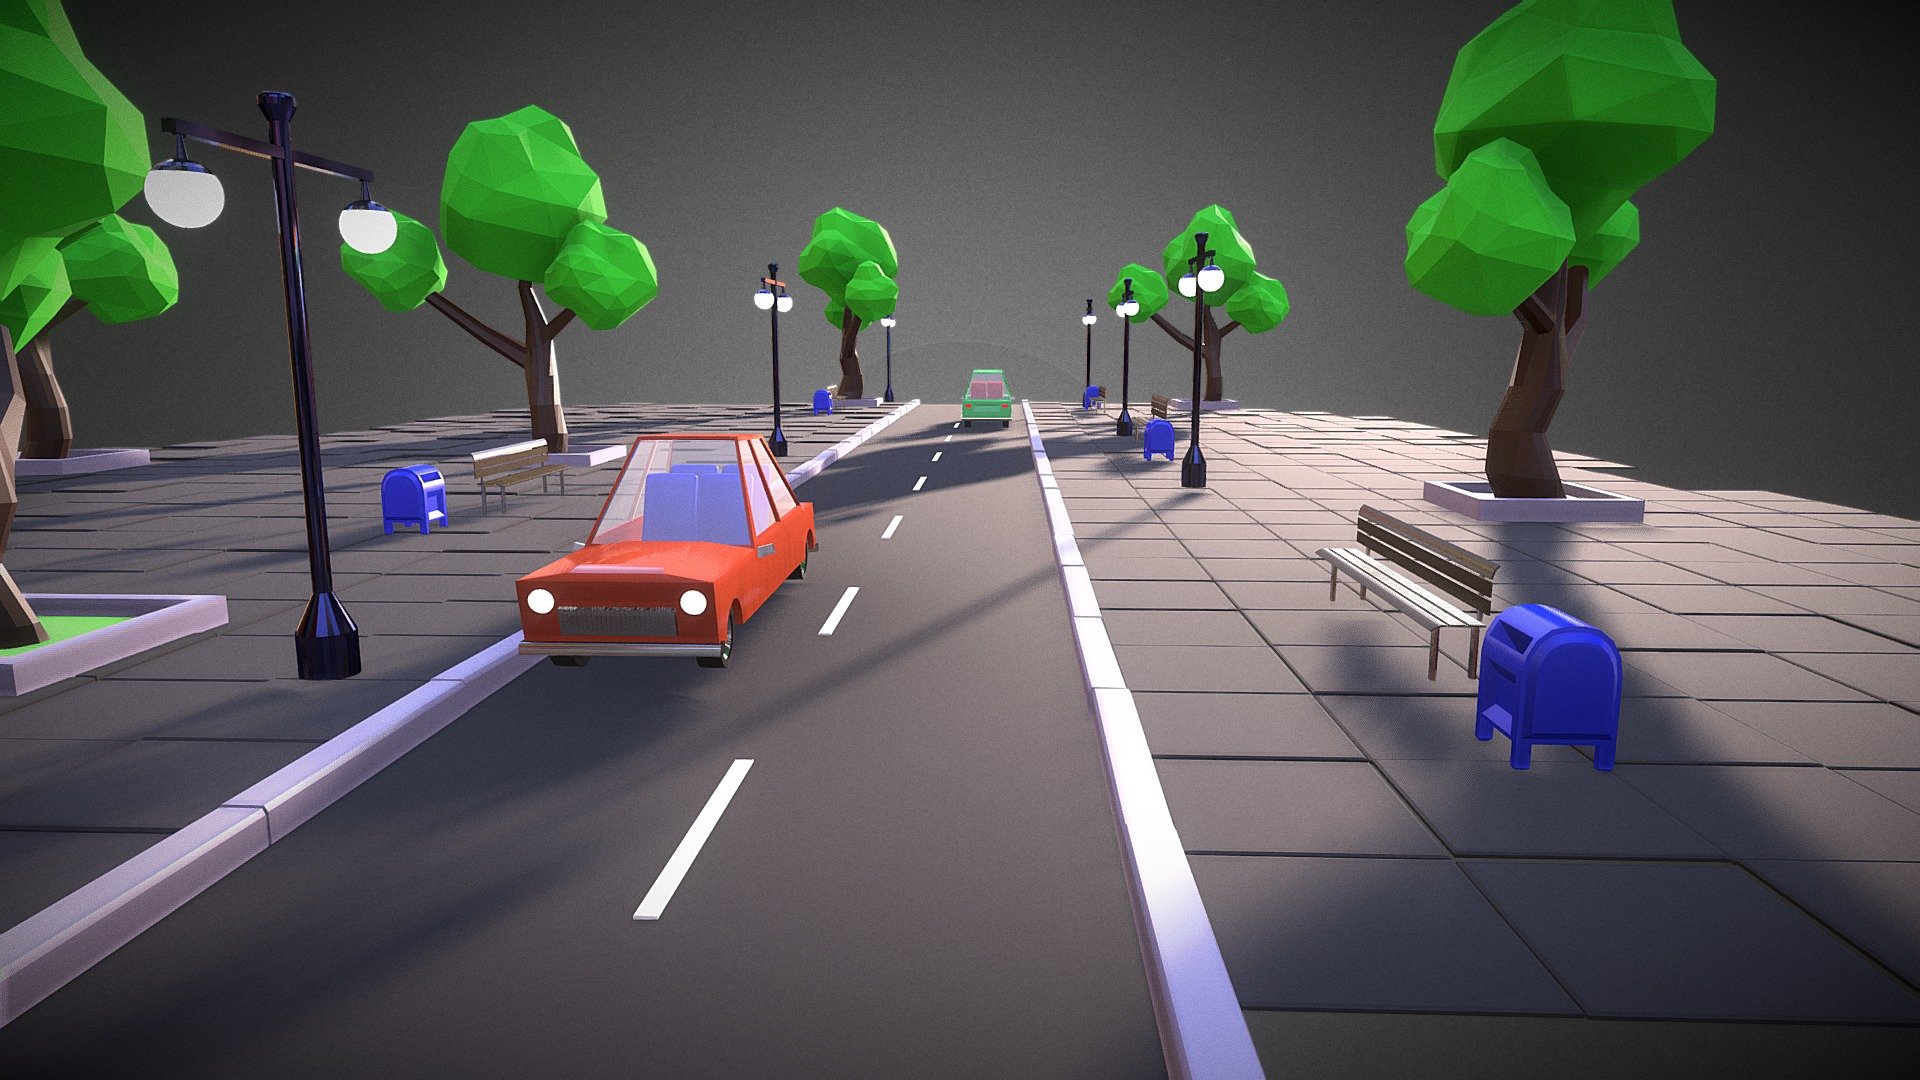 Road with cars cartoon style - Road with cars cartoon style - Download Free 3D model by visotsky.vyacheslav 3d model